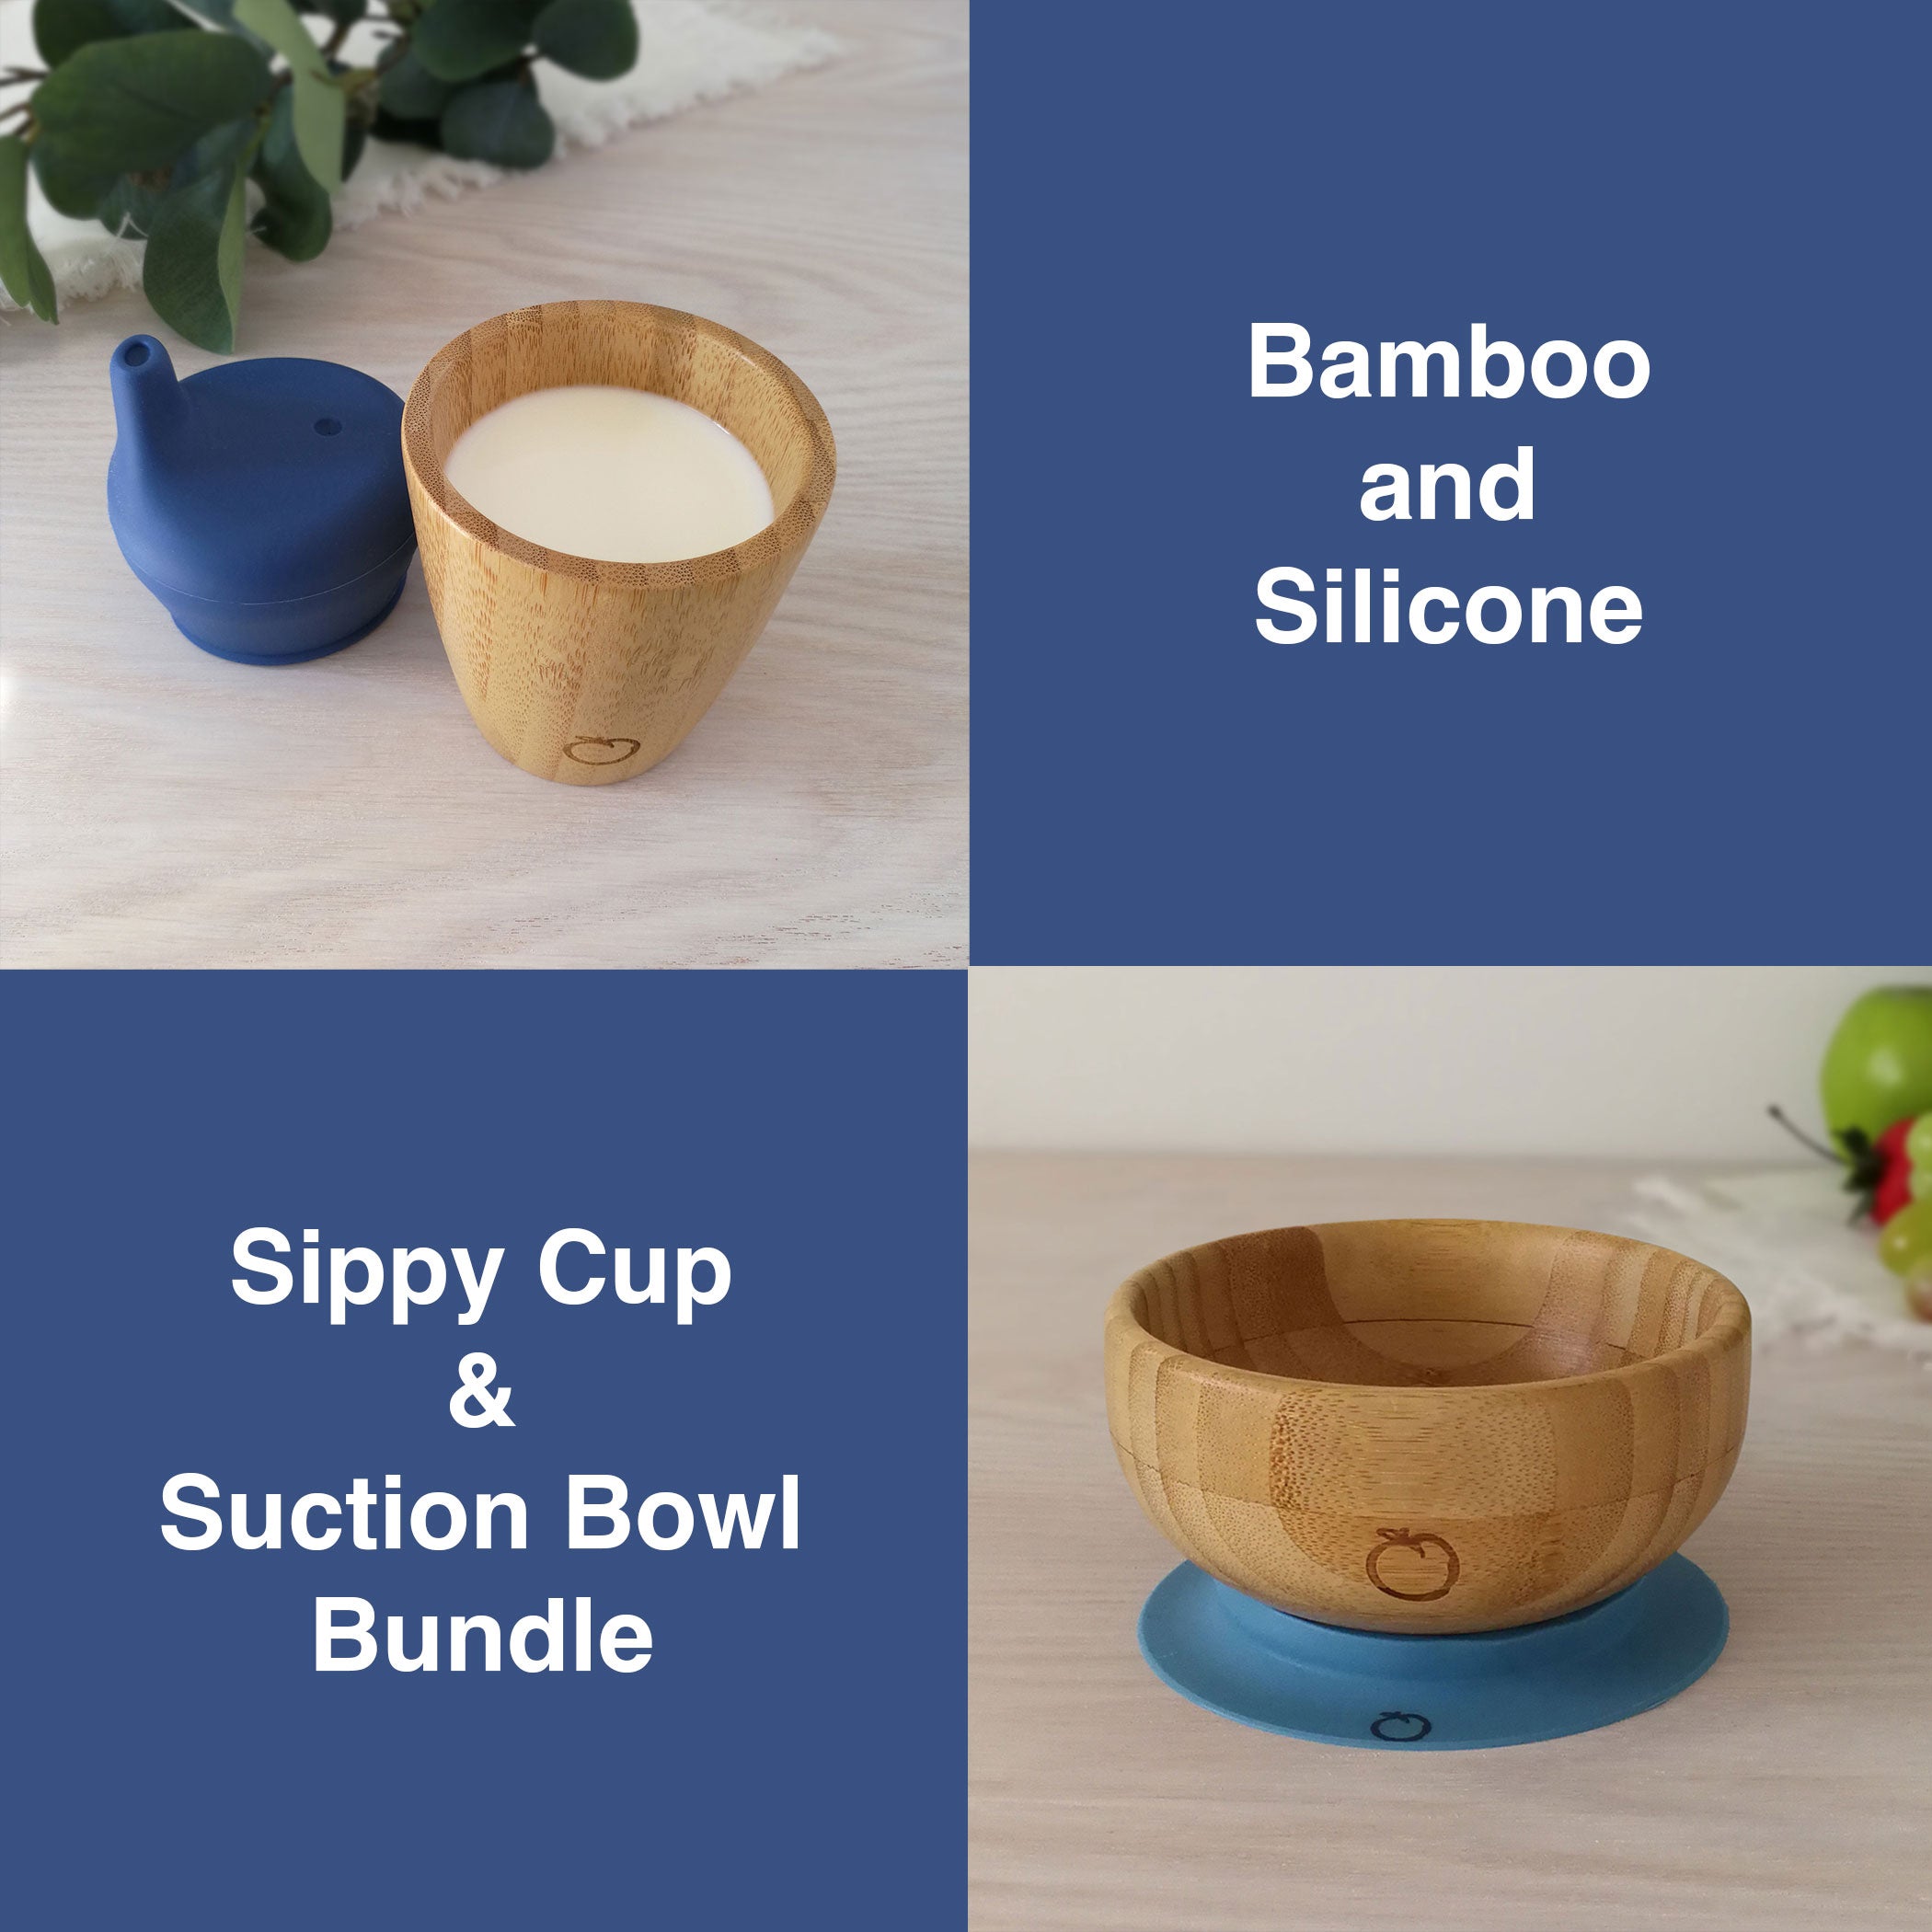 Plum Bamboo and Silicone Sippy Cup & Suction Bowl Bundle - Navy & Teal